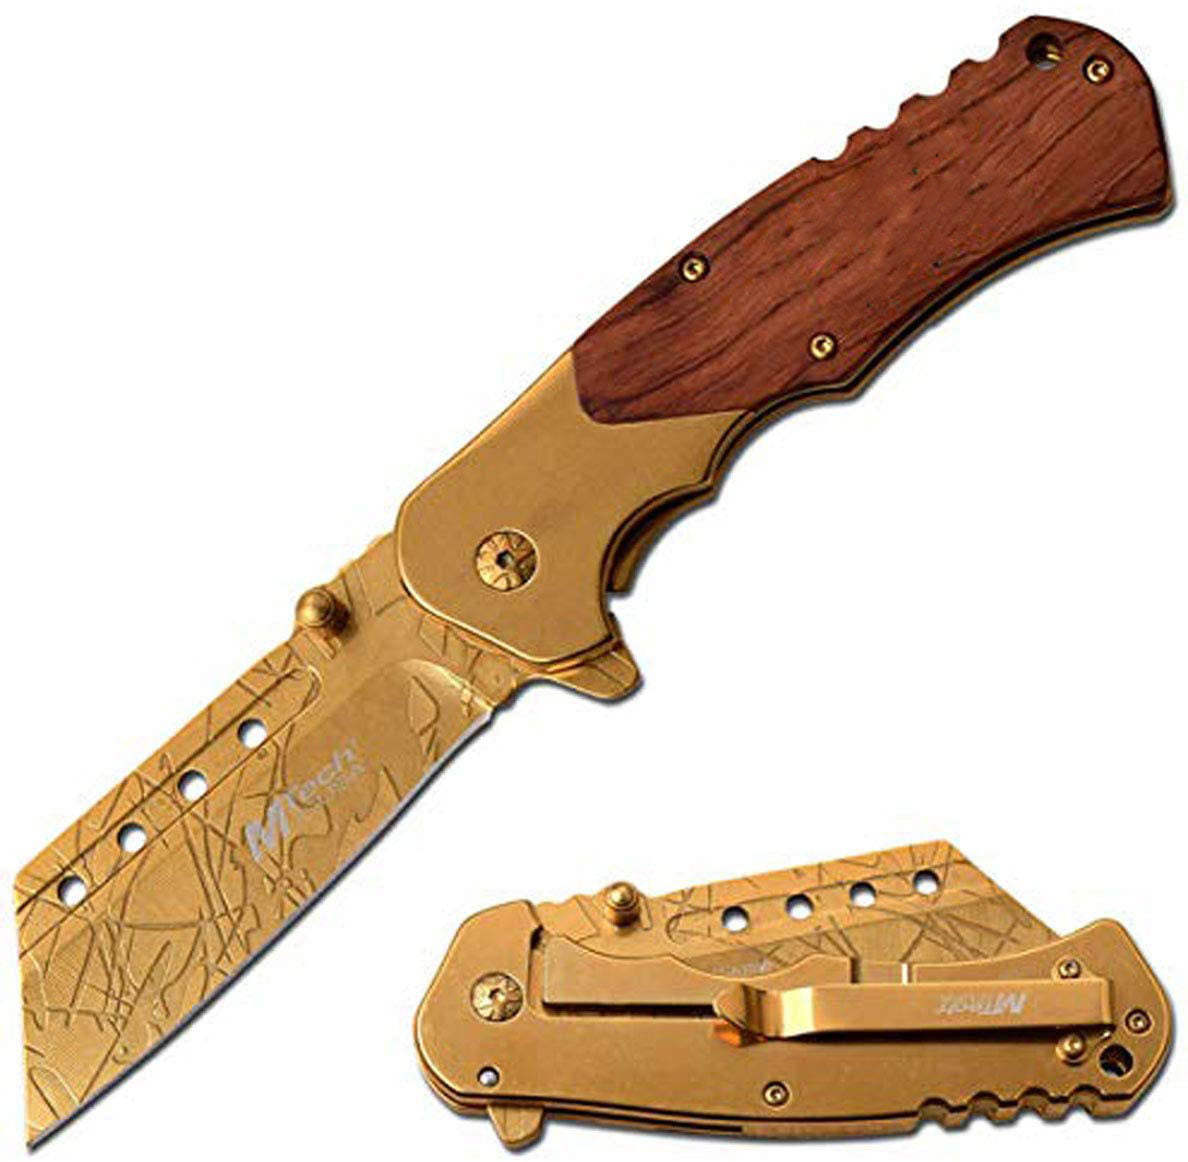 GIFTS INFINITY 8.25" Overall Personalized Pocket Knife Engraved for Men Tactical Assisted Opening Knives